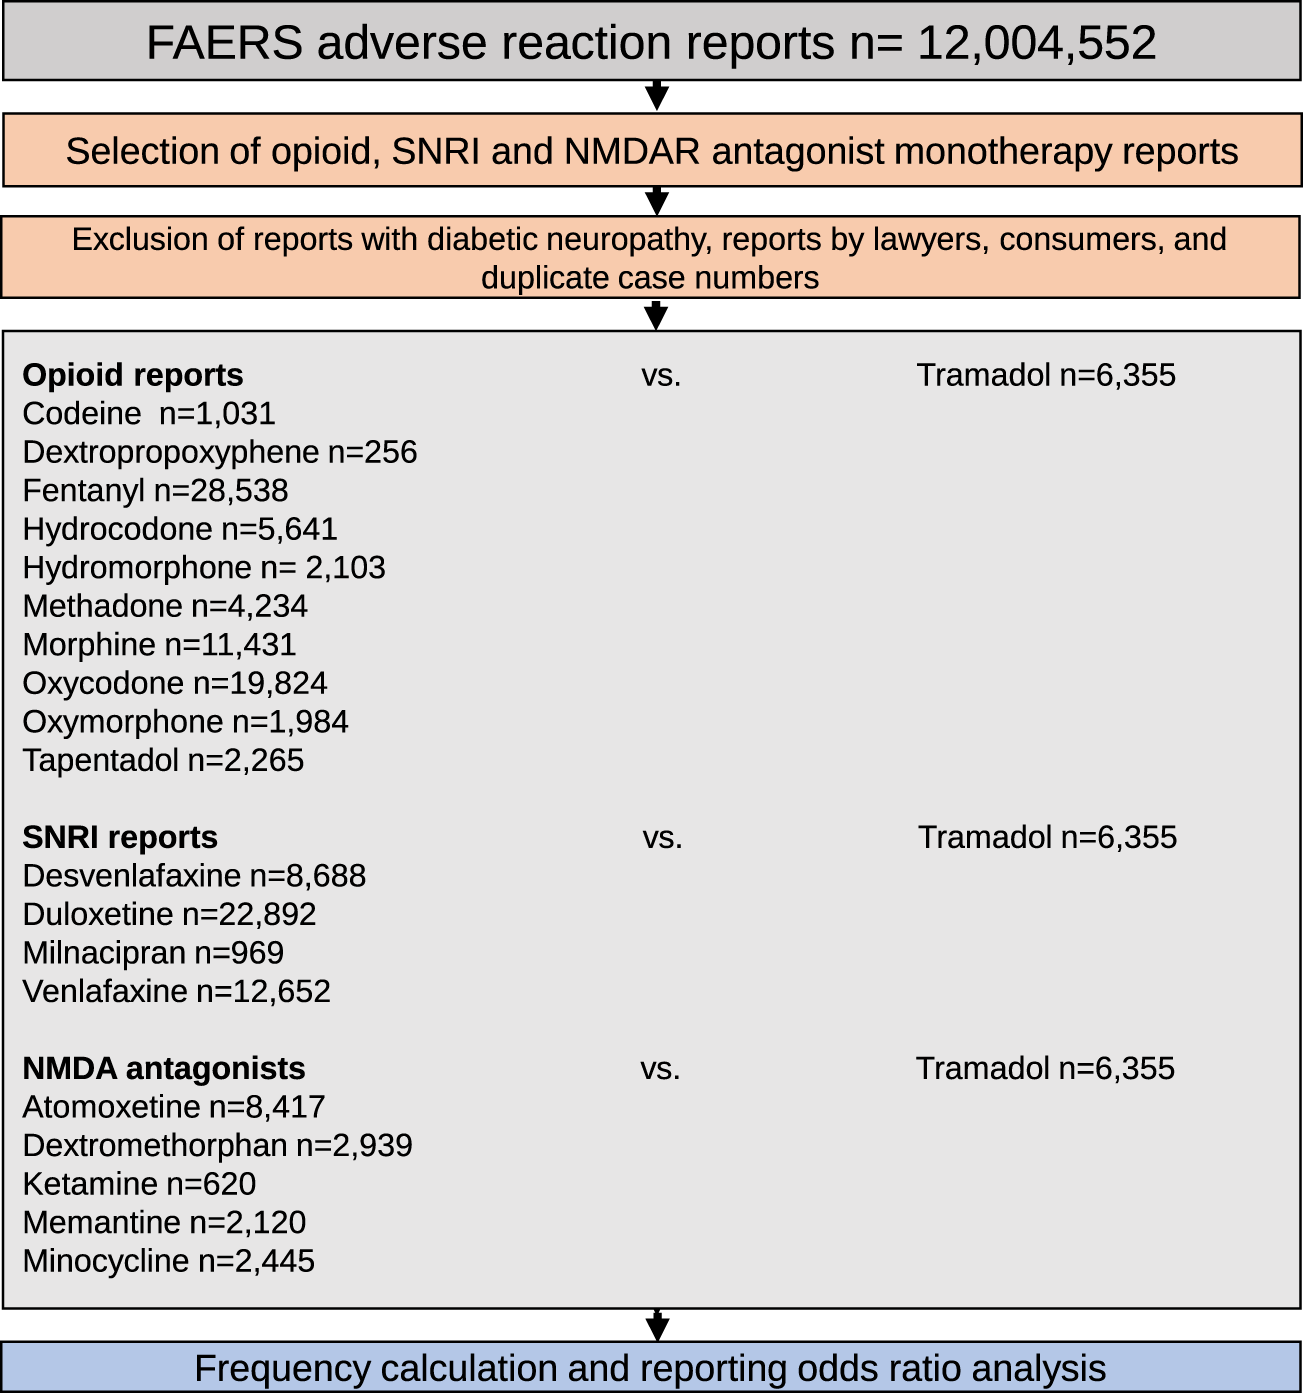 Retrospective Analysis Reveals Significant Association Of Hypoglycemia With  Tramadol And Methadone In Contrast To Other Opioids | Scientific Reports